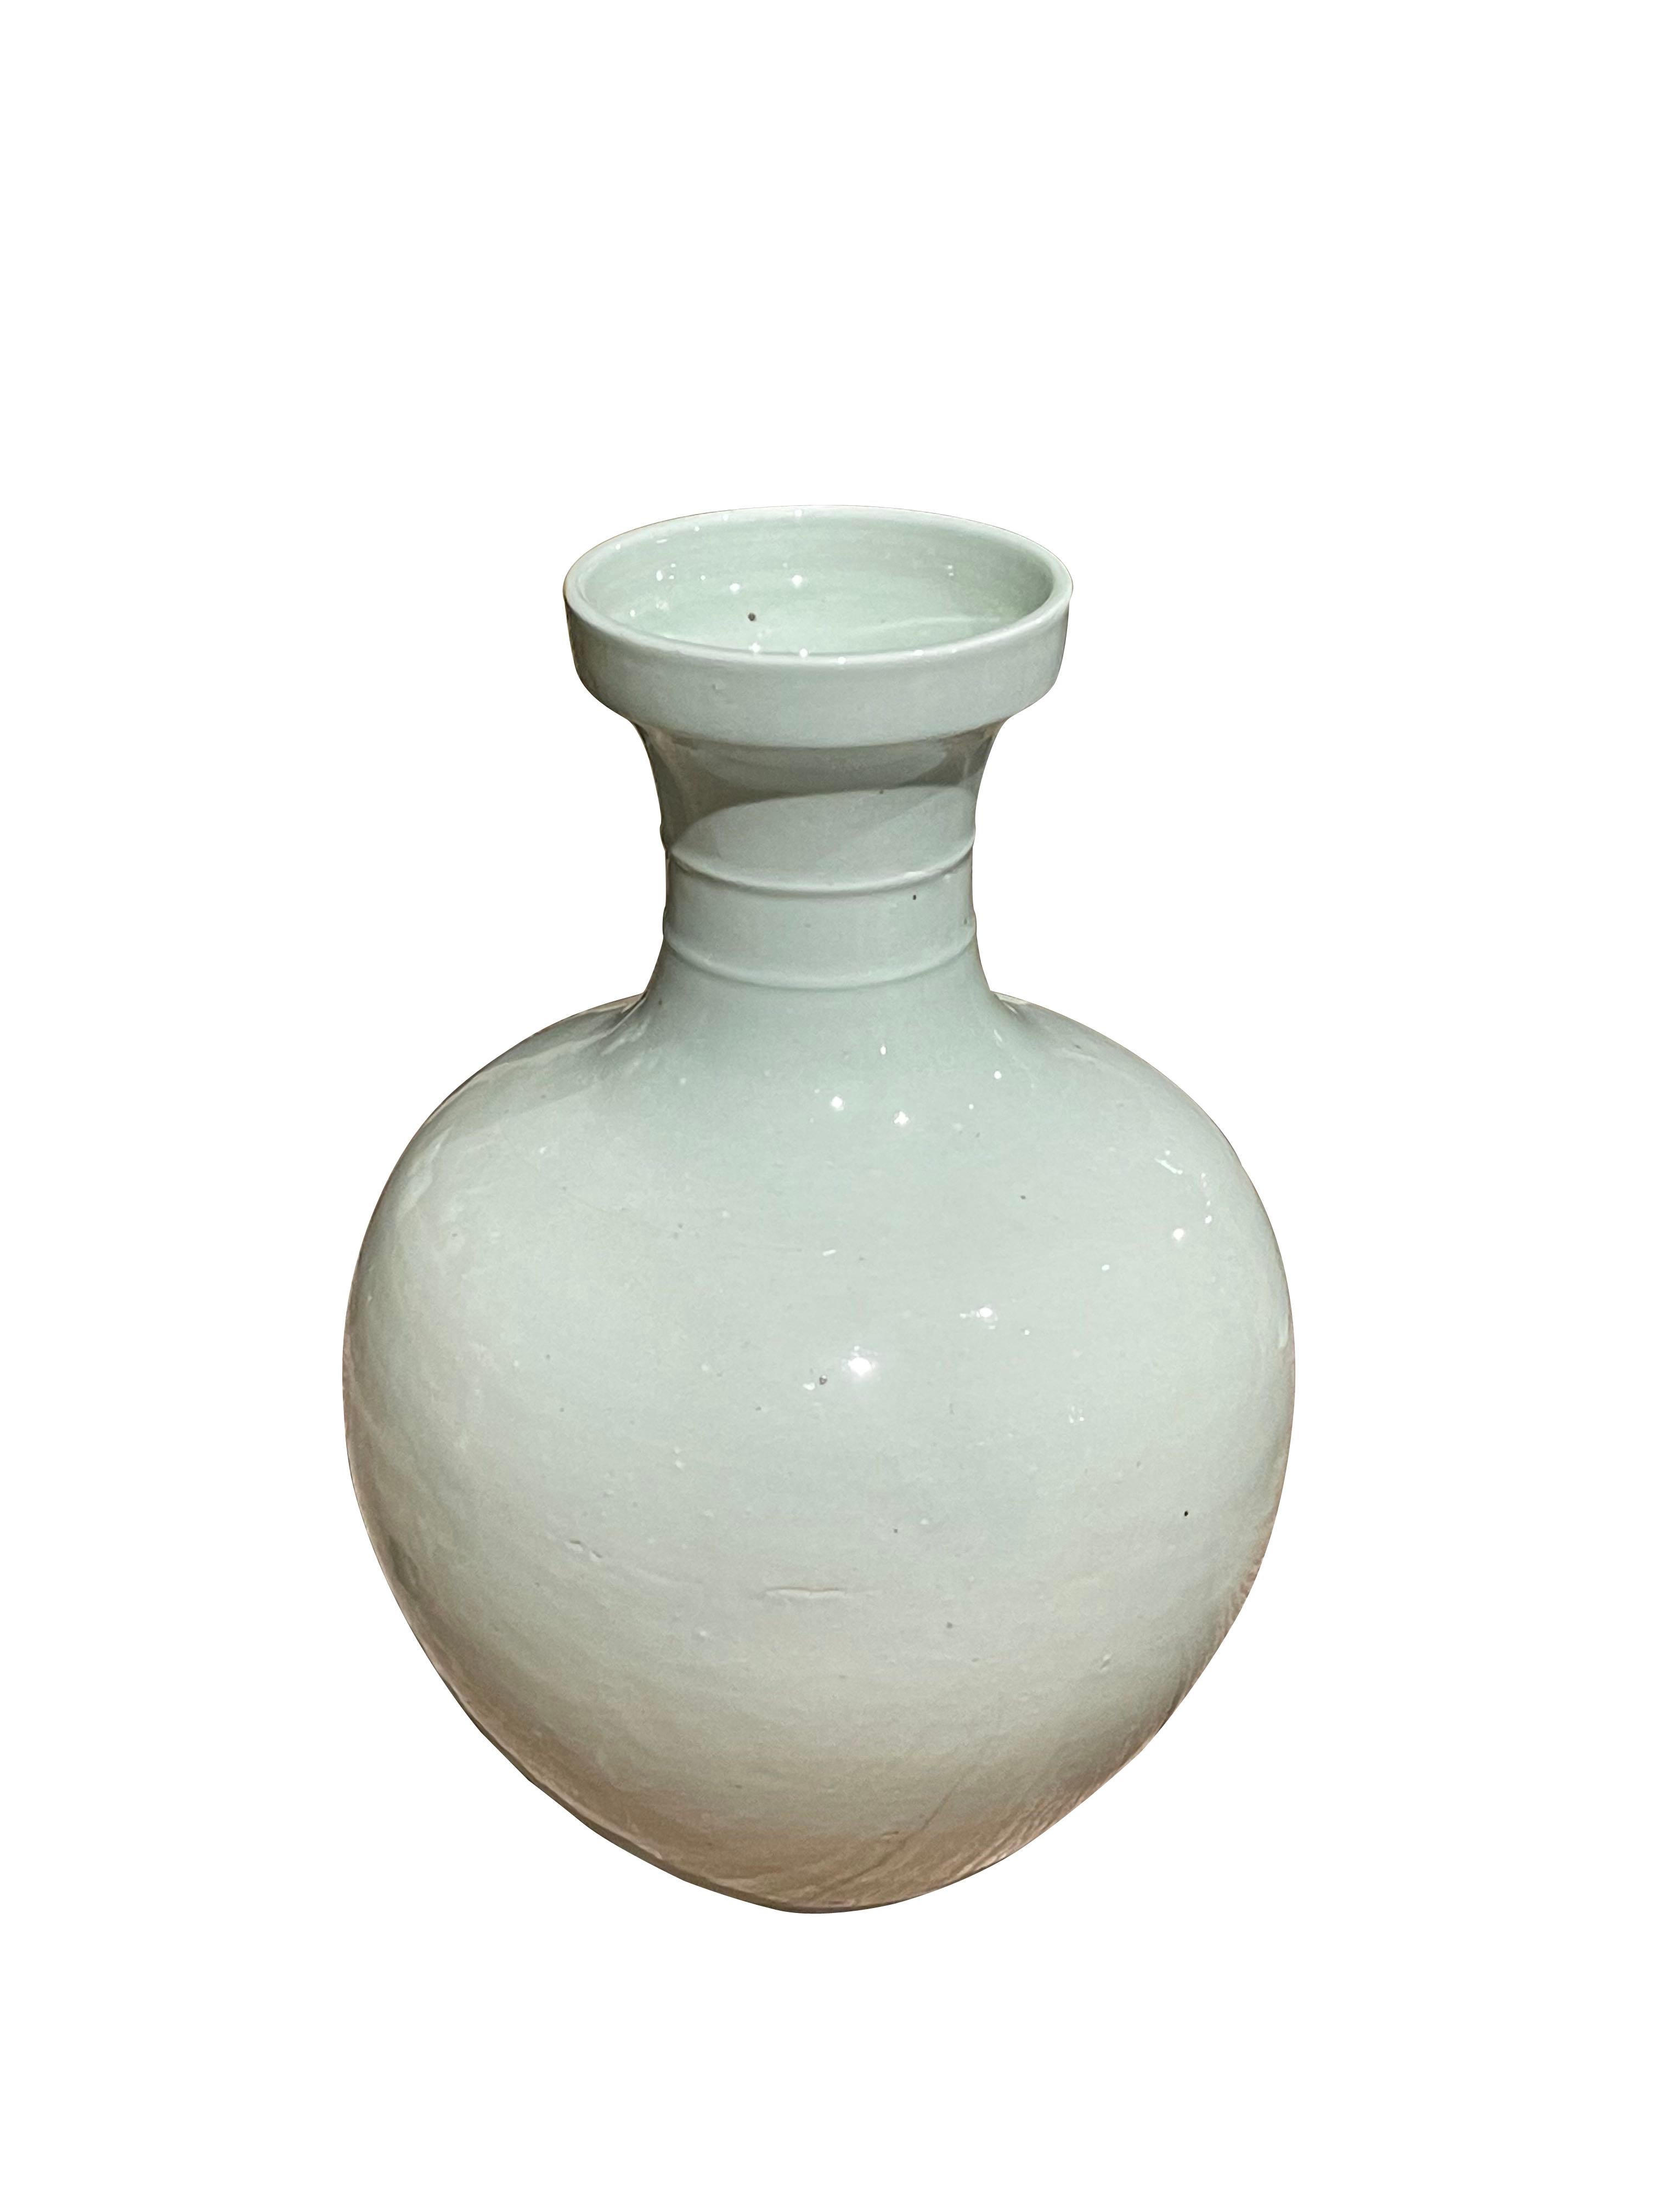 Contemporary Chinese very pale blue ceramic vase.
Decorative cup design at top and horizontal raised rib detail.
Also available in a larger size (S6236 ).
ARRIVING APRIL

